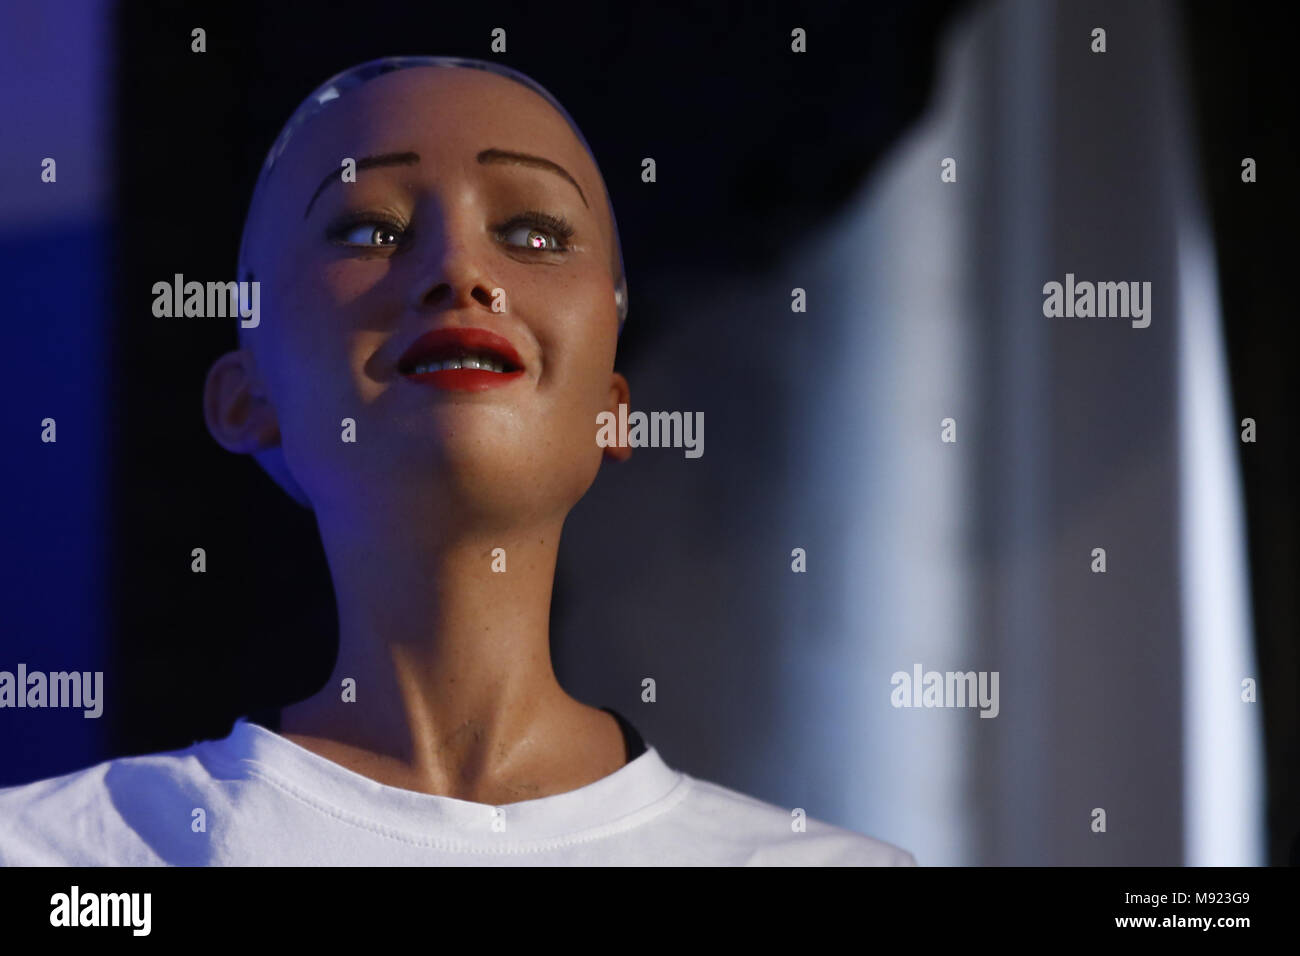 March 21, 2018 - Kathmandu, Nepal - Sophia, a humanoid robot with Saudi  Arabian citizenship reacts as she speaks during the United Nation's  innovation conference in Kathmandu, Nepal on March 21, 2018.